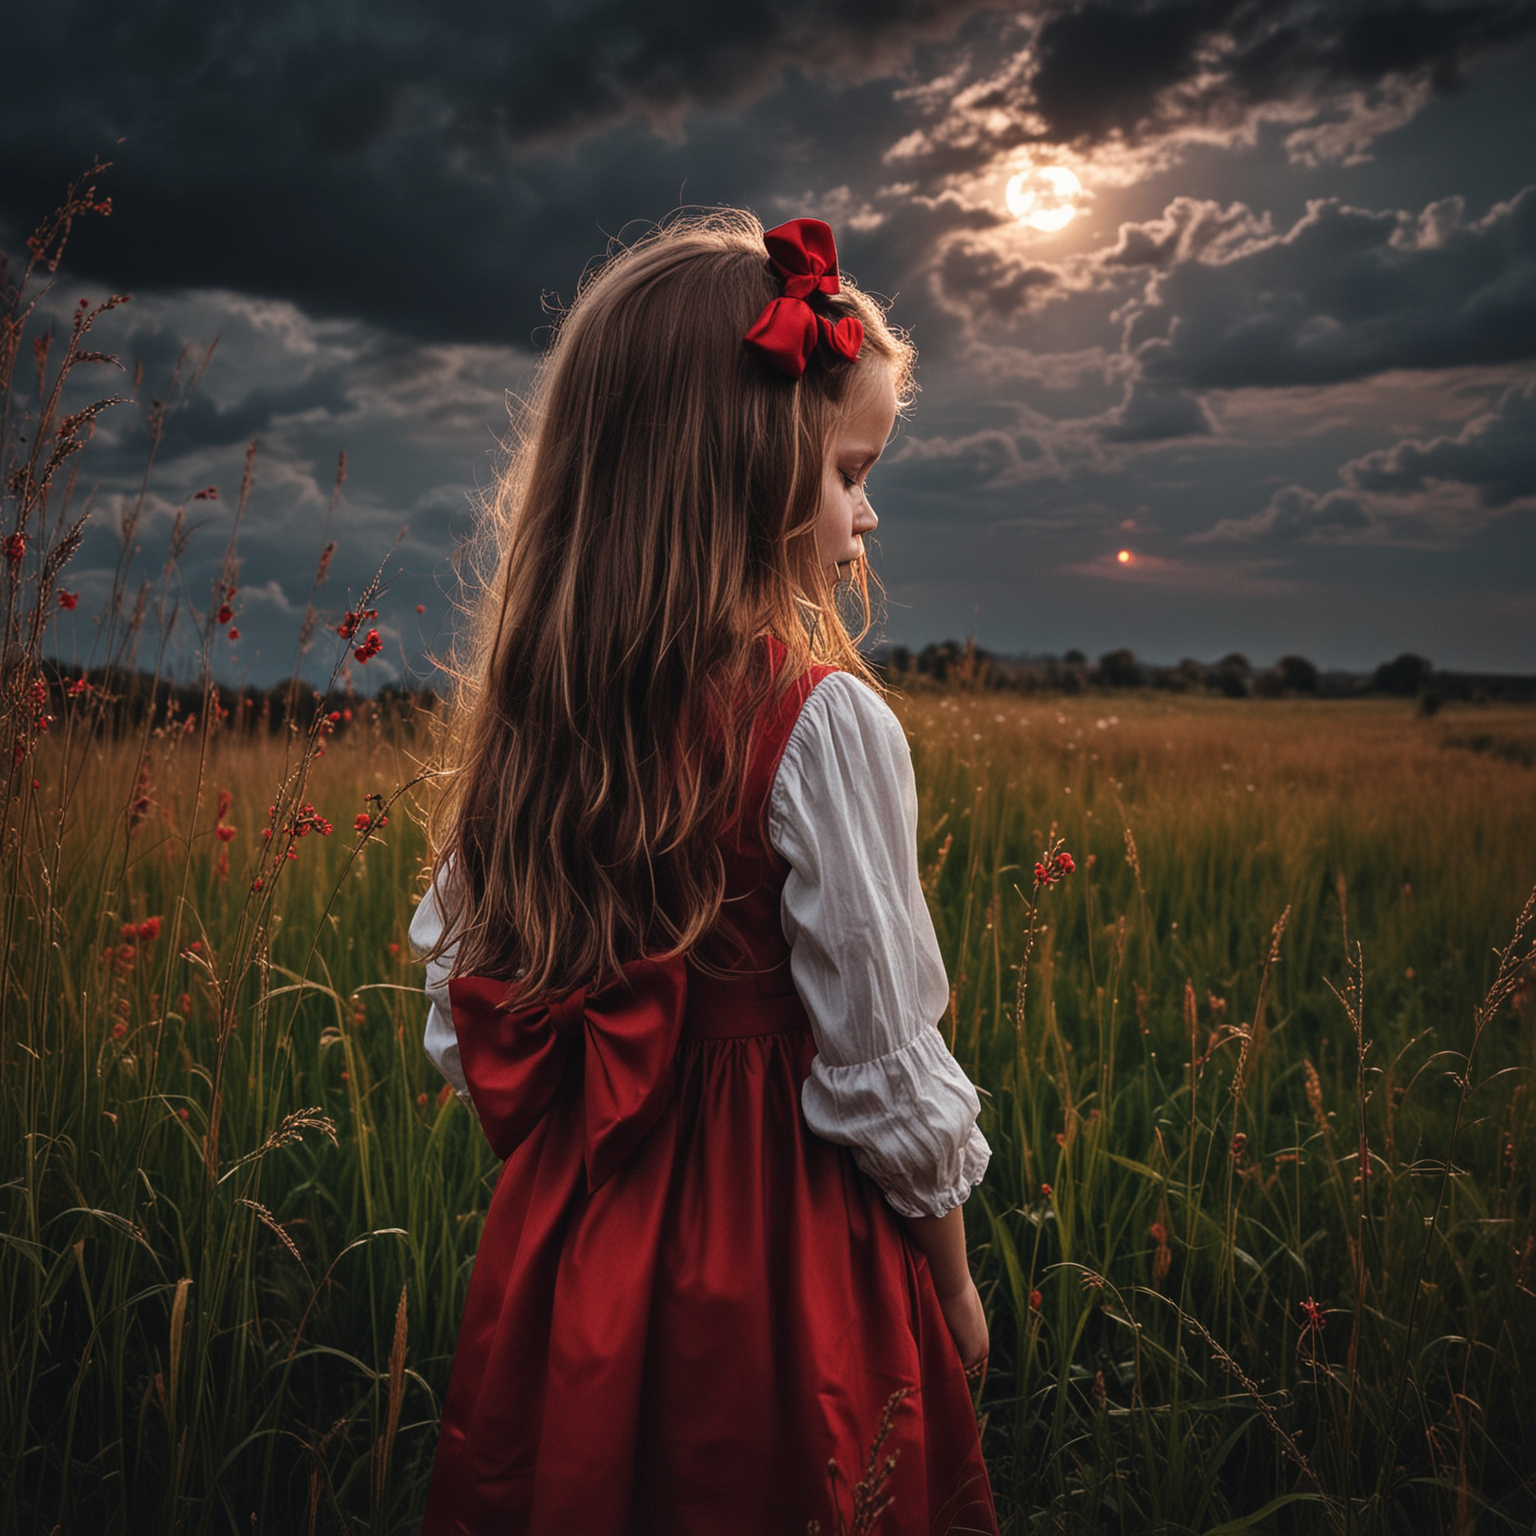 child alone sad backlight long hair back high grass colors flowers stormy clouds moon  red bow